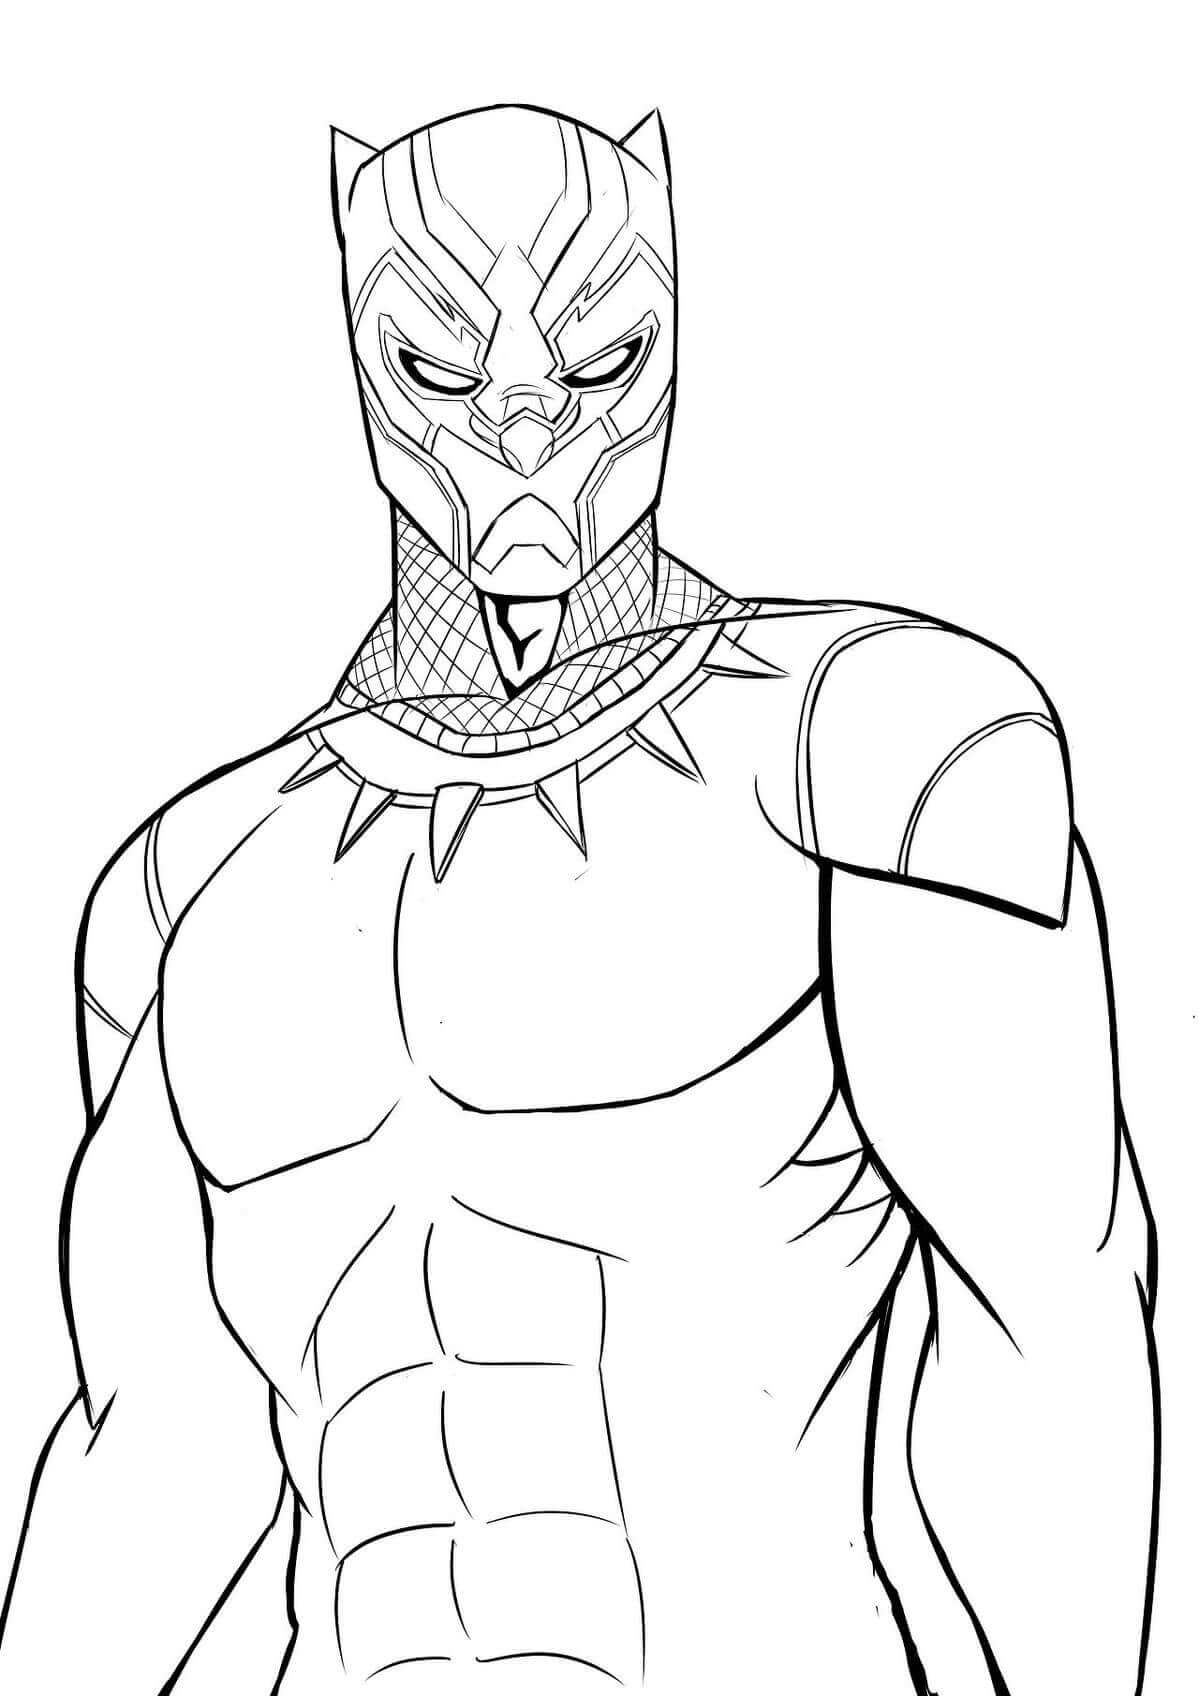 Awesome Black Panther Coloring Page - Free Printable Coloring Pages for Kids